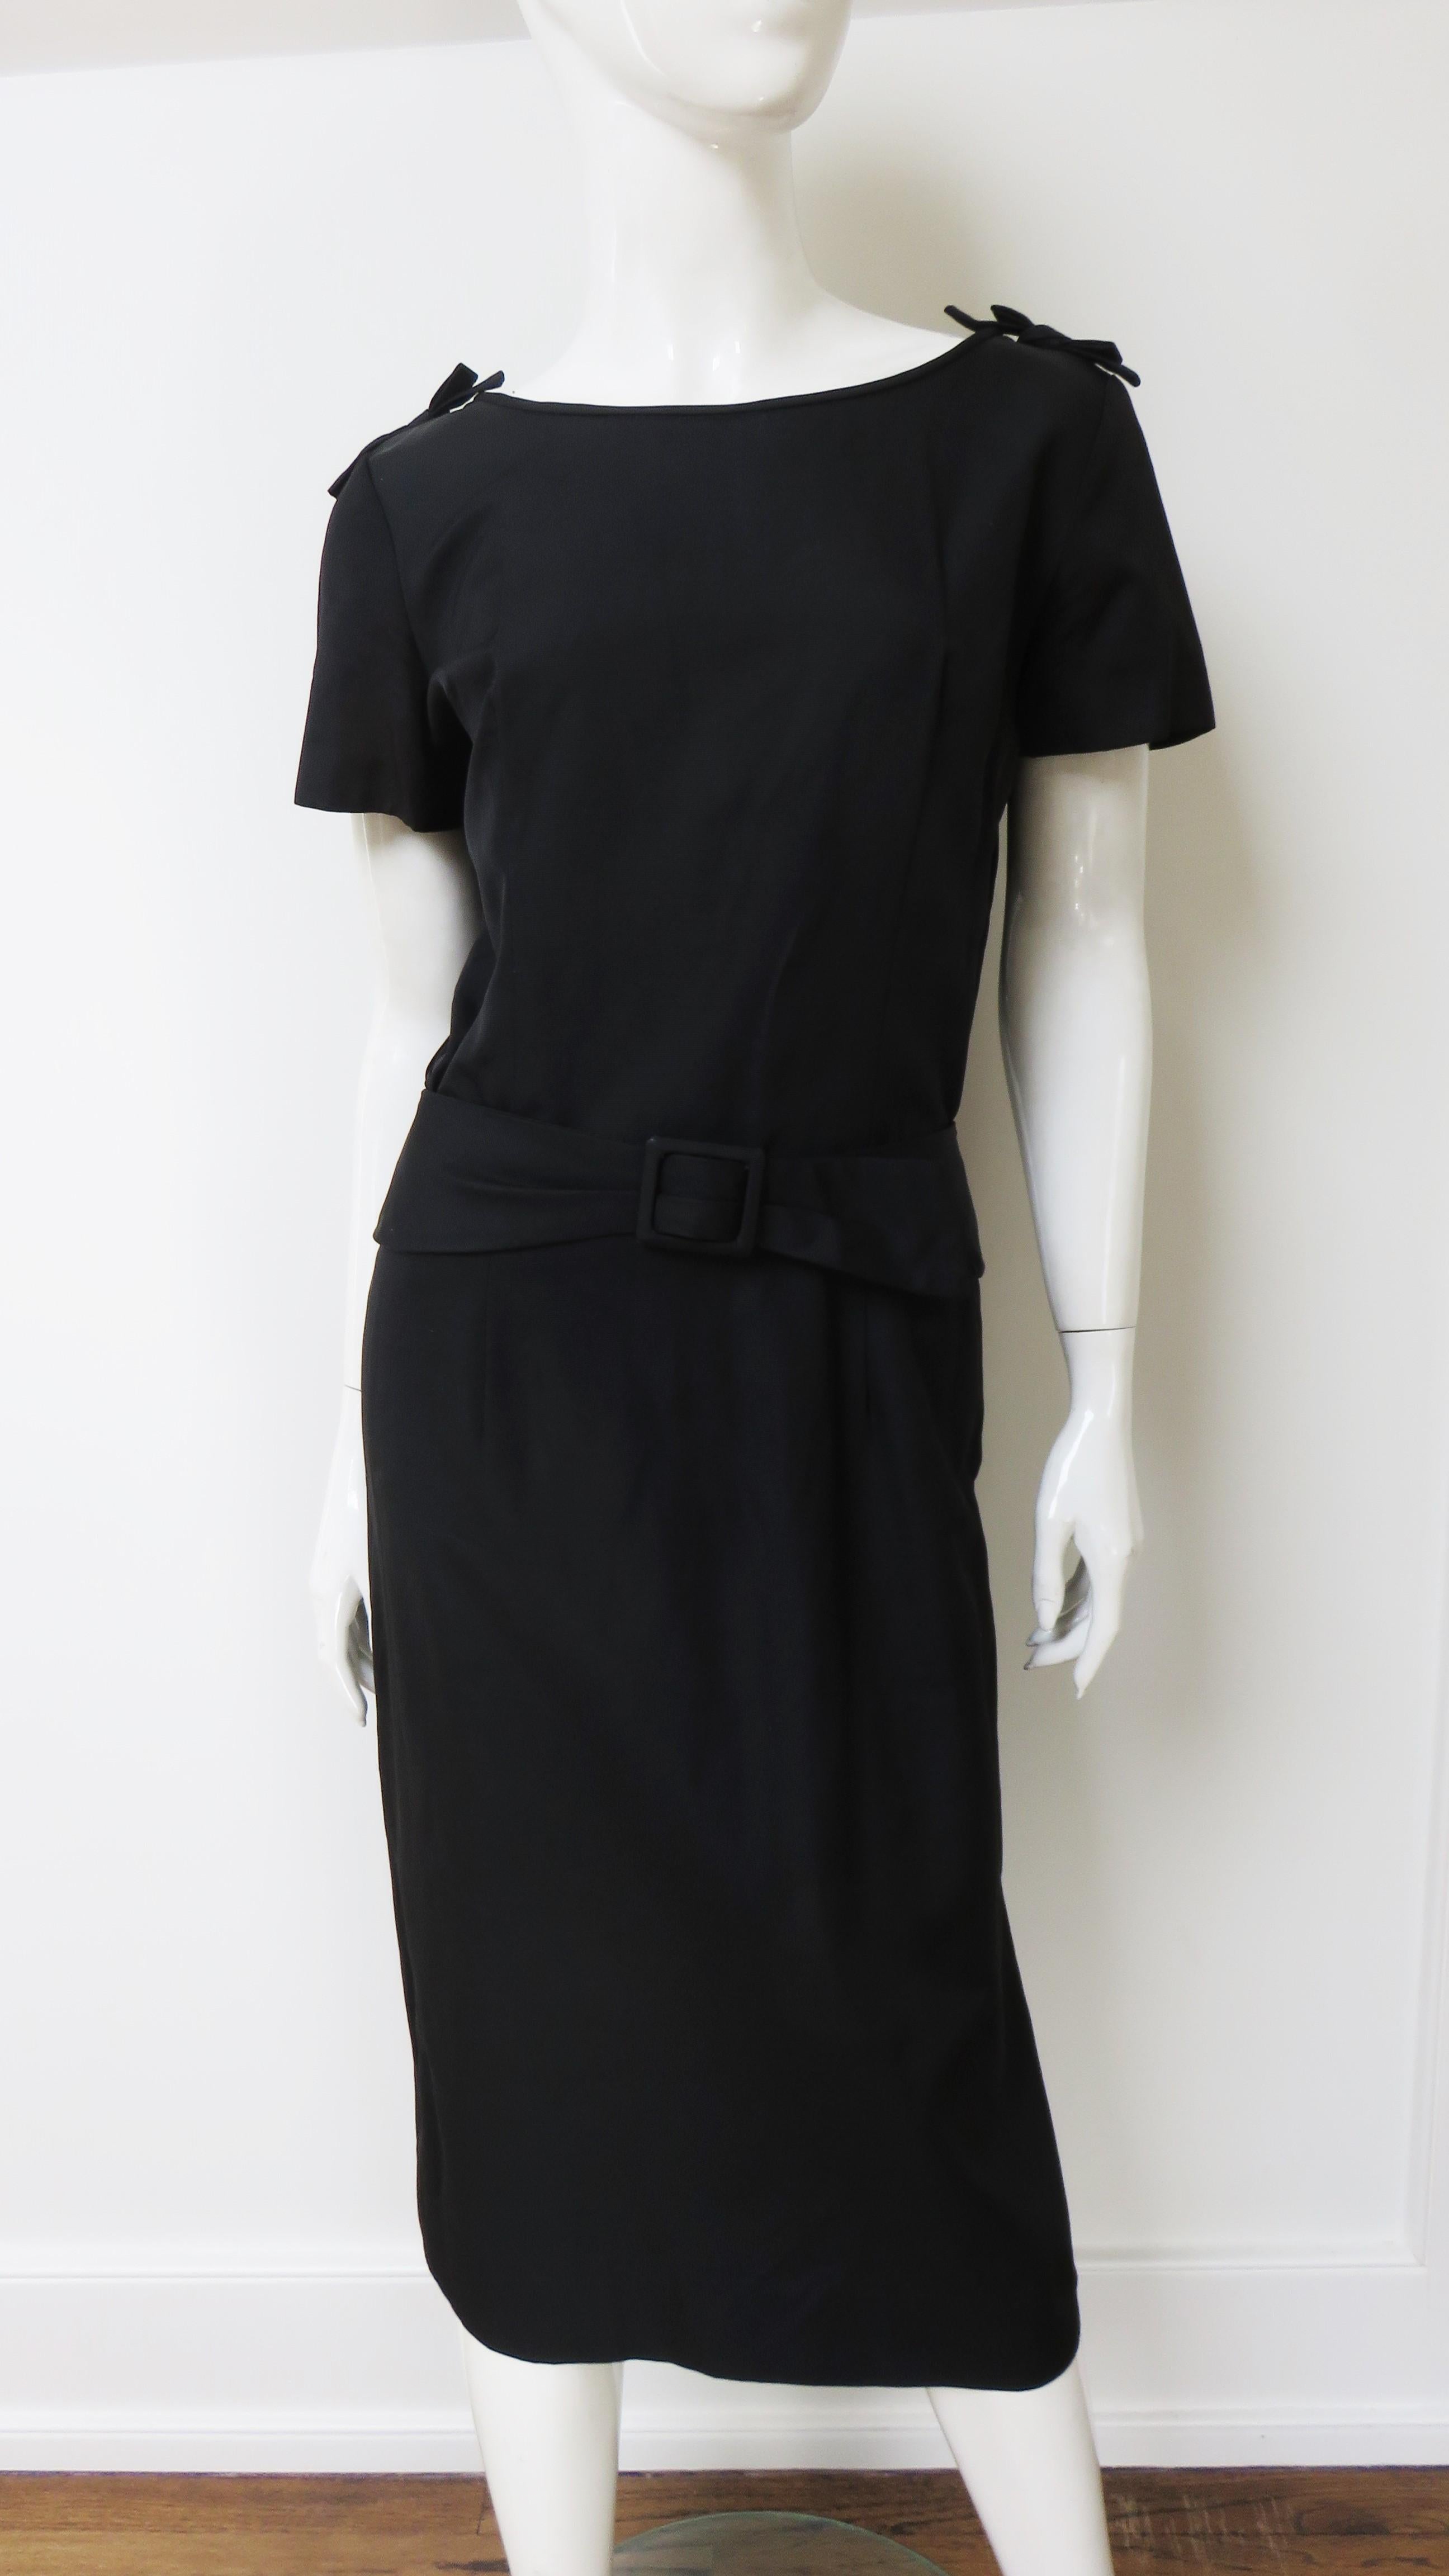 A great black dress with a bateau neckline, short sleeves and small vertical straps draping in the bodice back. It has a straight skirt with a back vent and an attached belt. The dress is unlined with a side metal zipper.
Fits size Medium.

Bust 